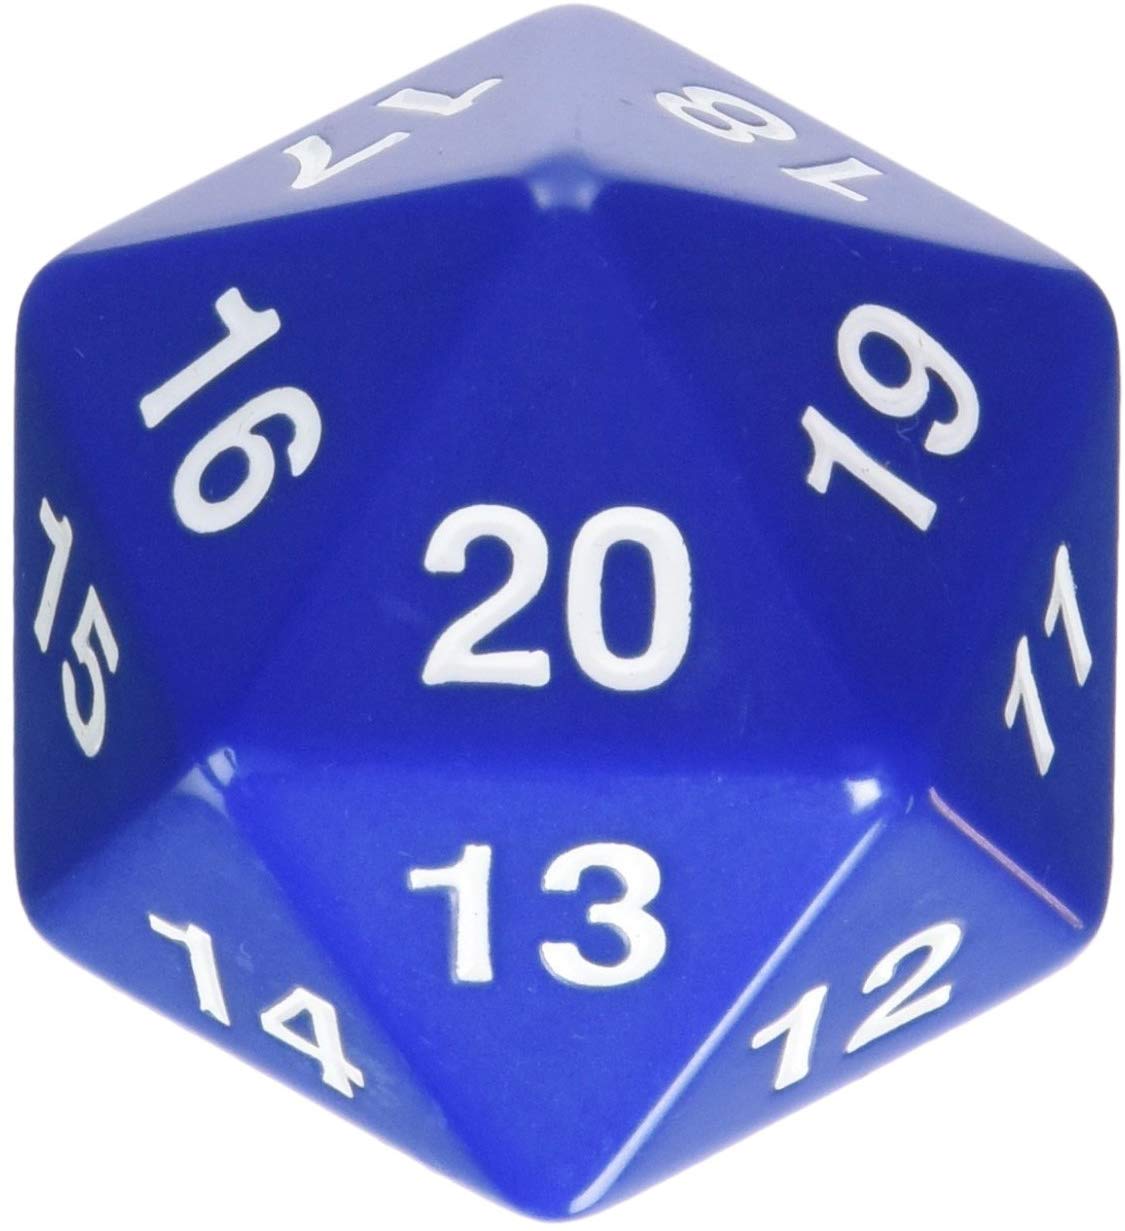 55mm Jumbo D20 Opaque Blue with White Numbers | Tacoma Games